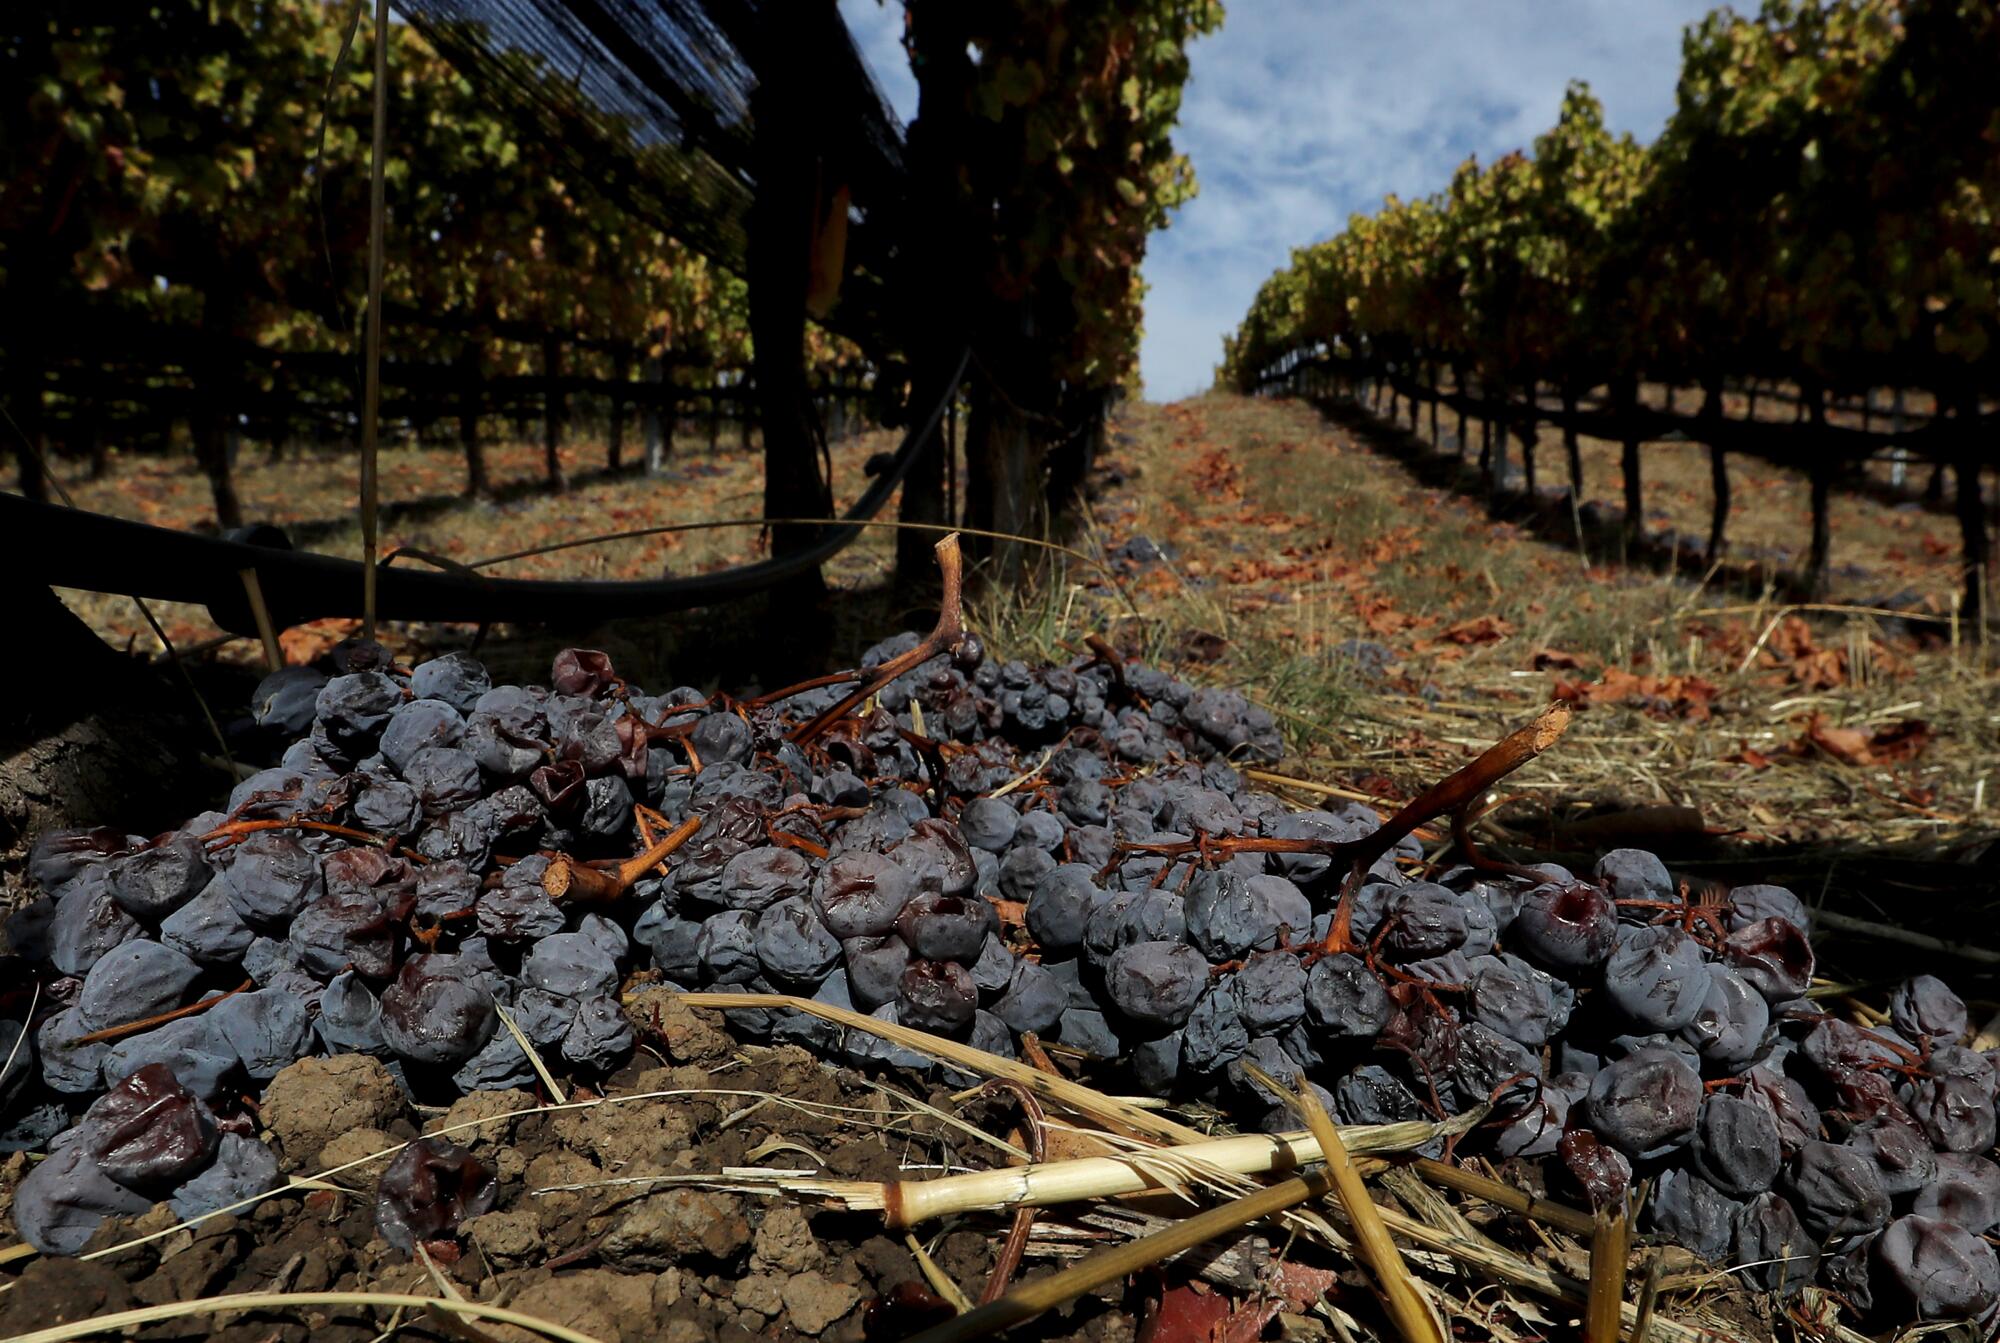 Grapes ruined by smoke have been trimmed from vines at Big Basin Vineyards in Boulder Creek.